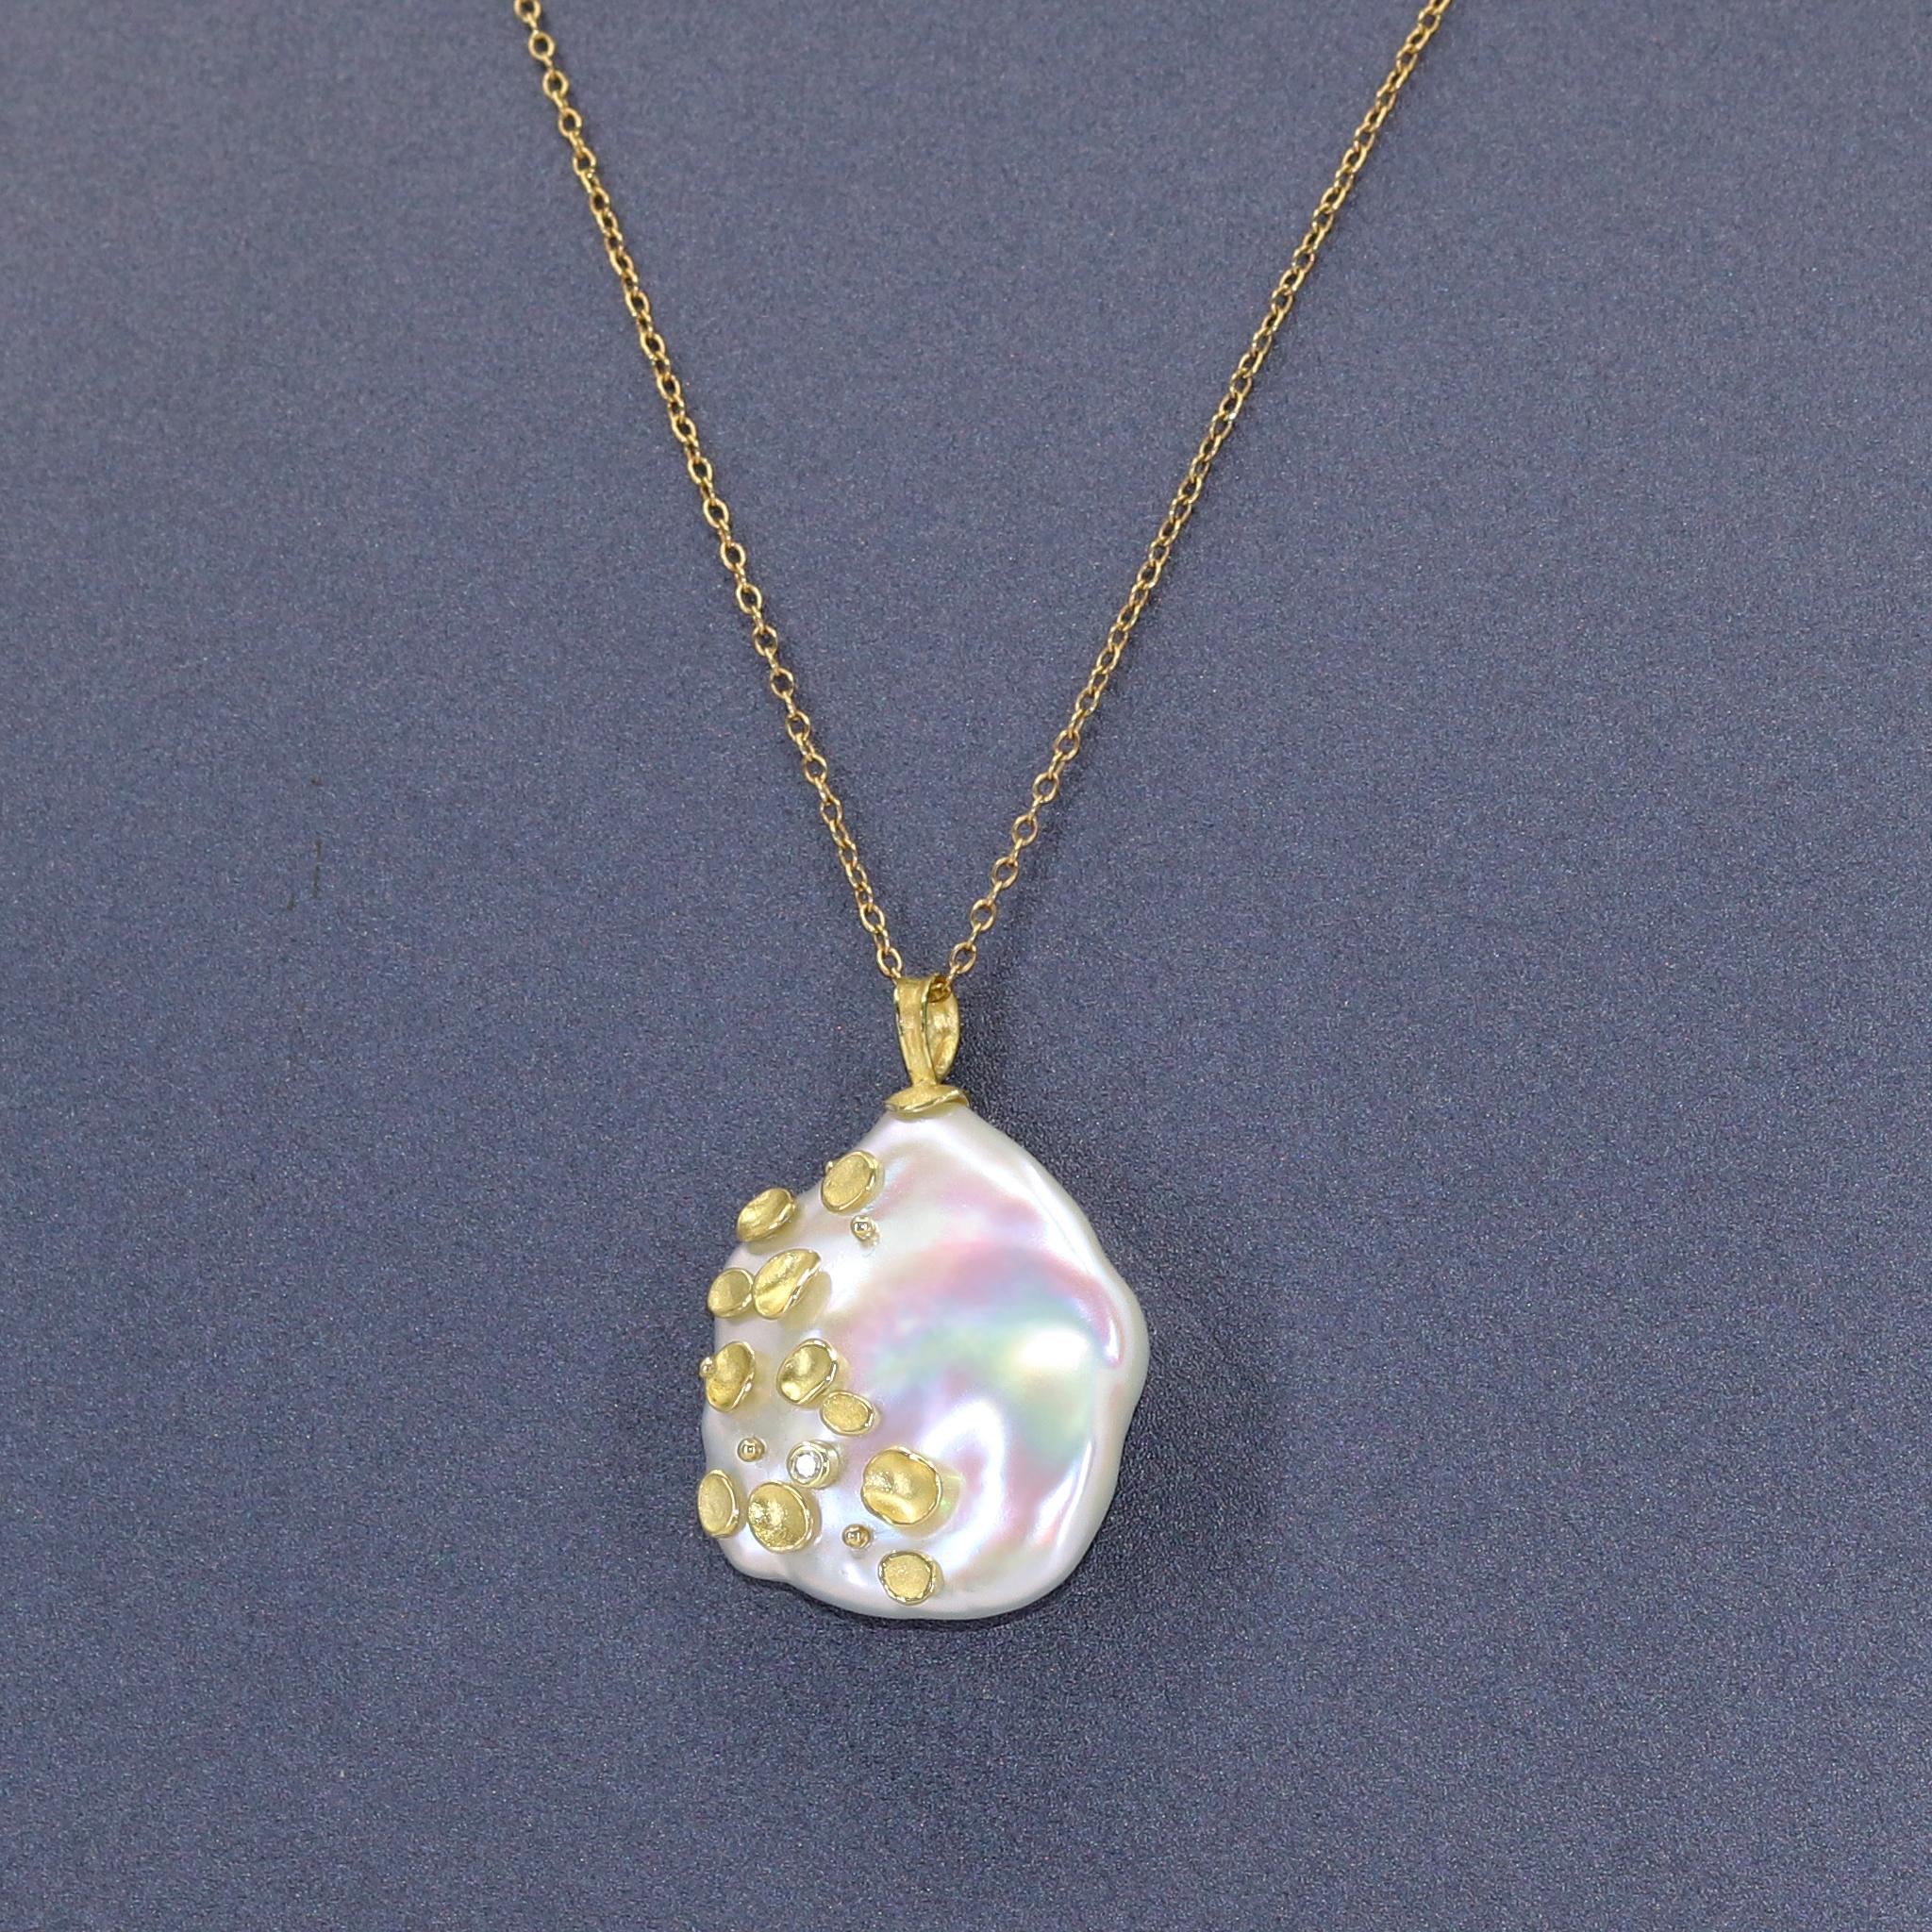 Artisan Barbara Heinrich One of a Kind Large Iridescent Pearl Diamond Gold Necklace